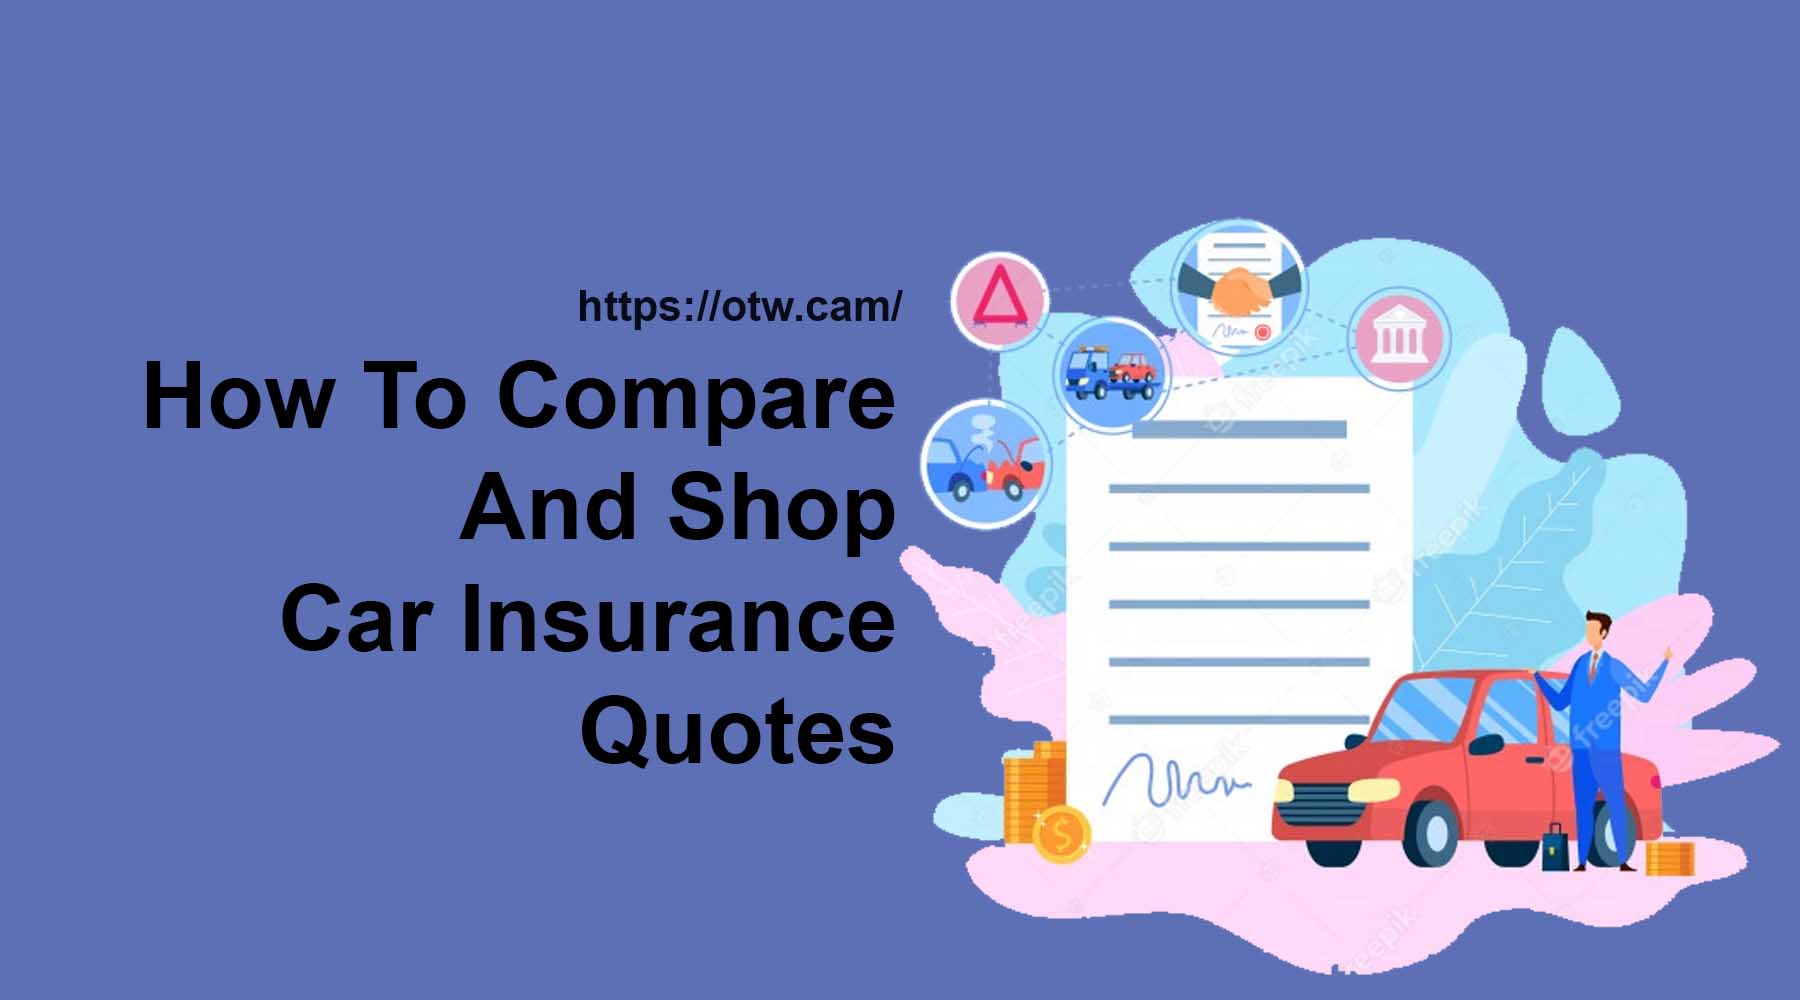 How To Compare And Shop Car Insurance Quotes